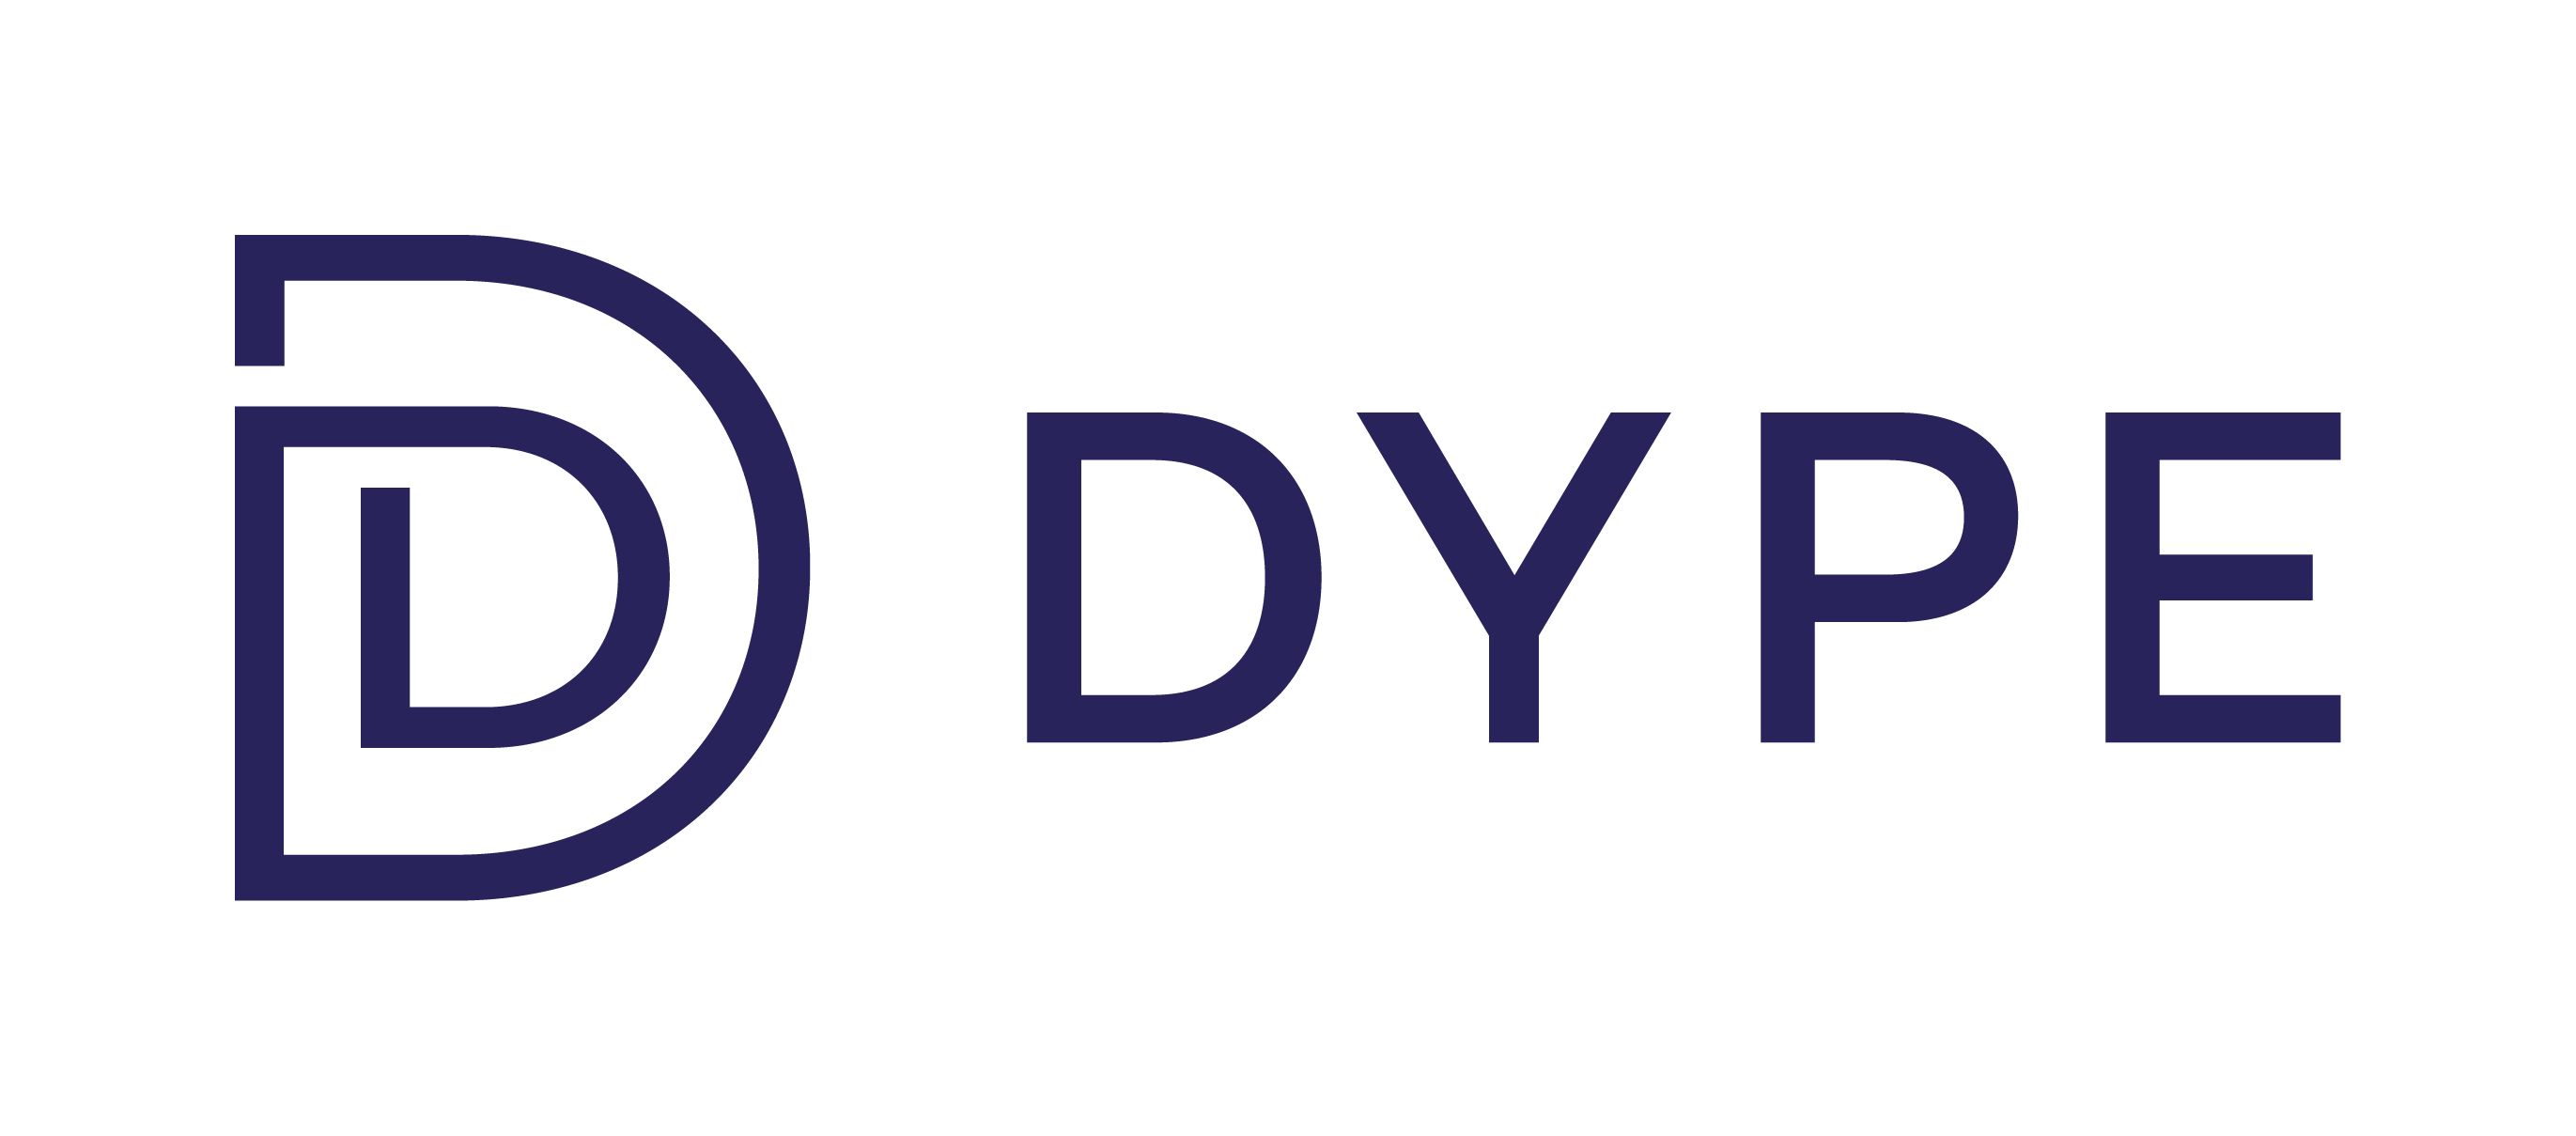 Dype